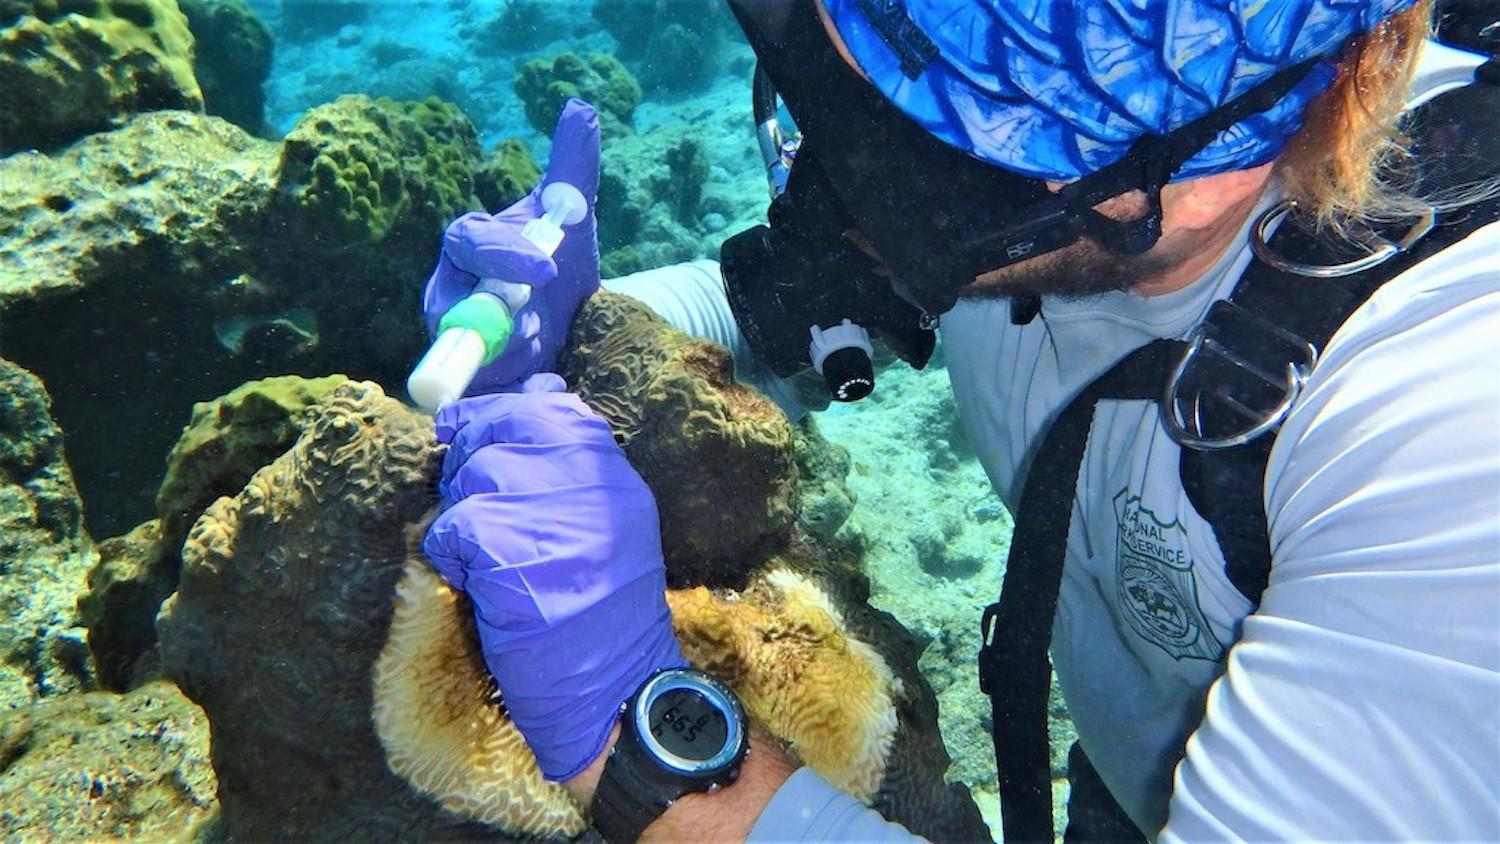 NPS biological science technician Nathaniel Hanna Holloway applies an amoxicillin treatment to a coral with white plague, a similar affliction to stony coral tissue loss disease, in Buck Island Reef in February, 2020. Source: Kristen Ewen, NPS.